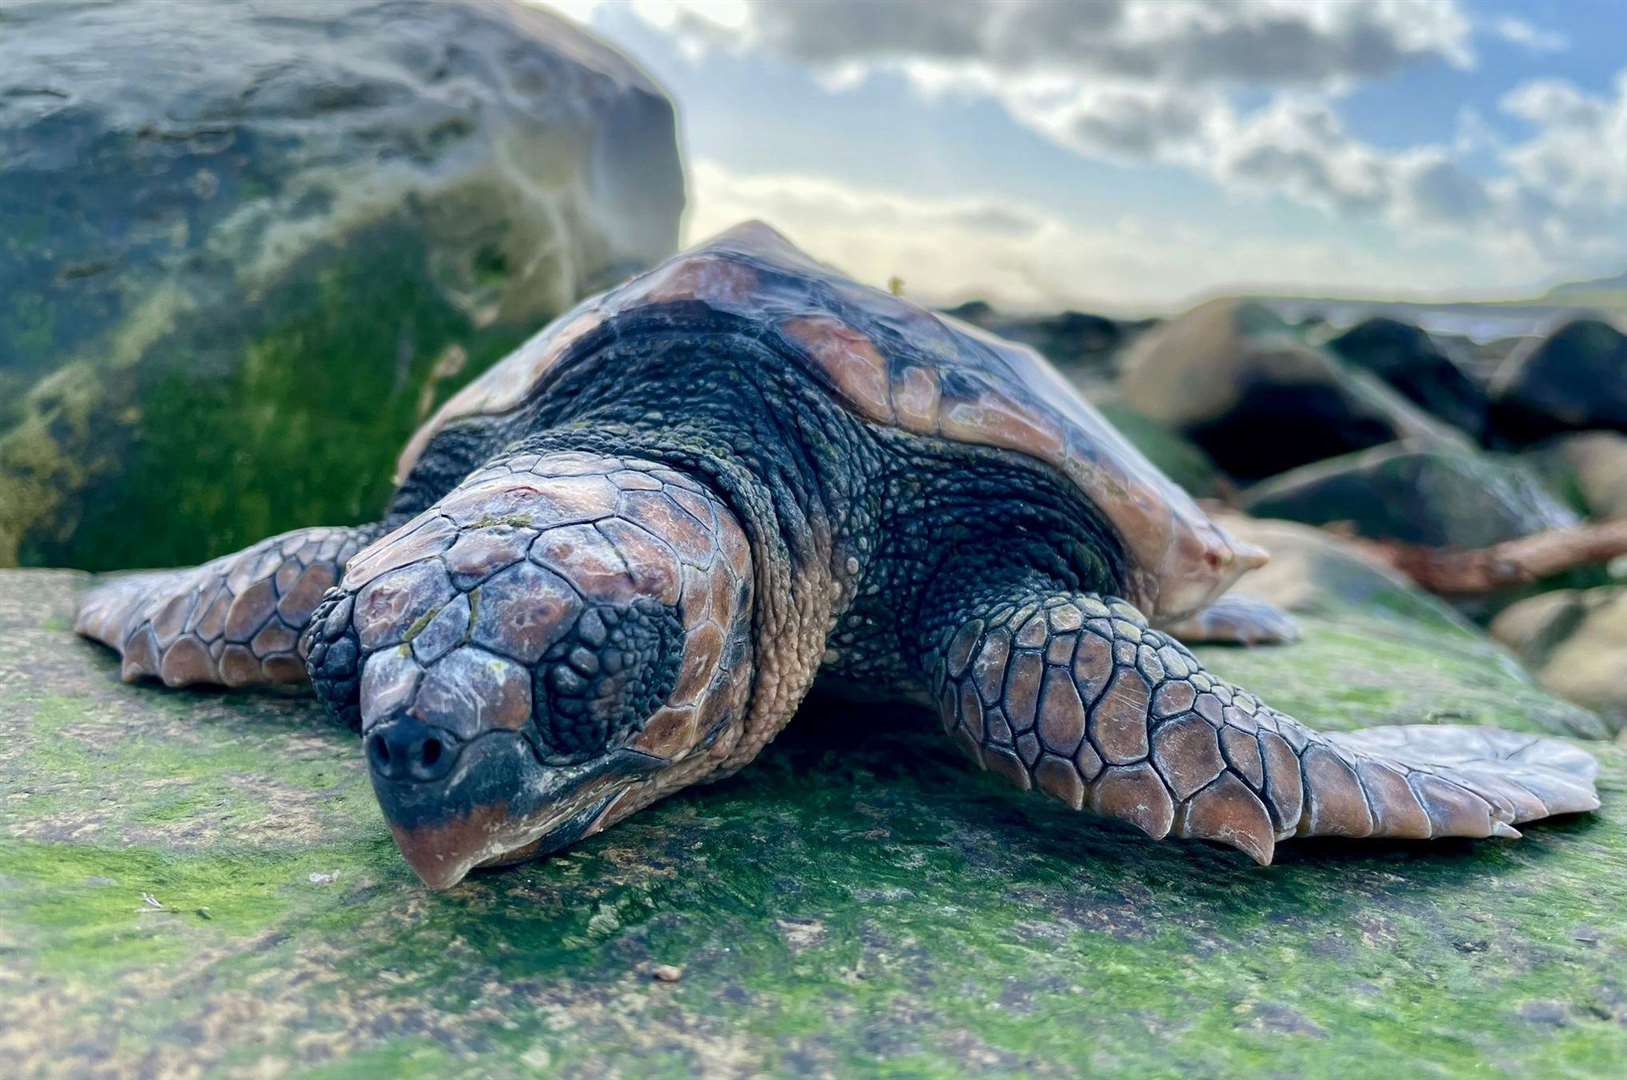 The turtle found in Dorset was taken in by rescuers. Picture: BDMLR